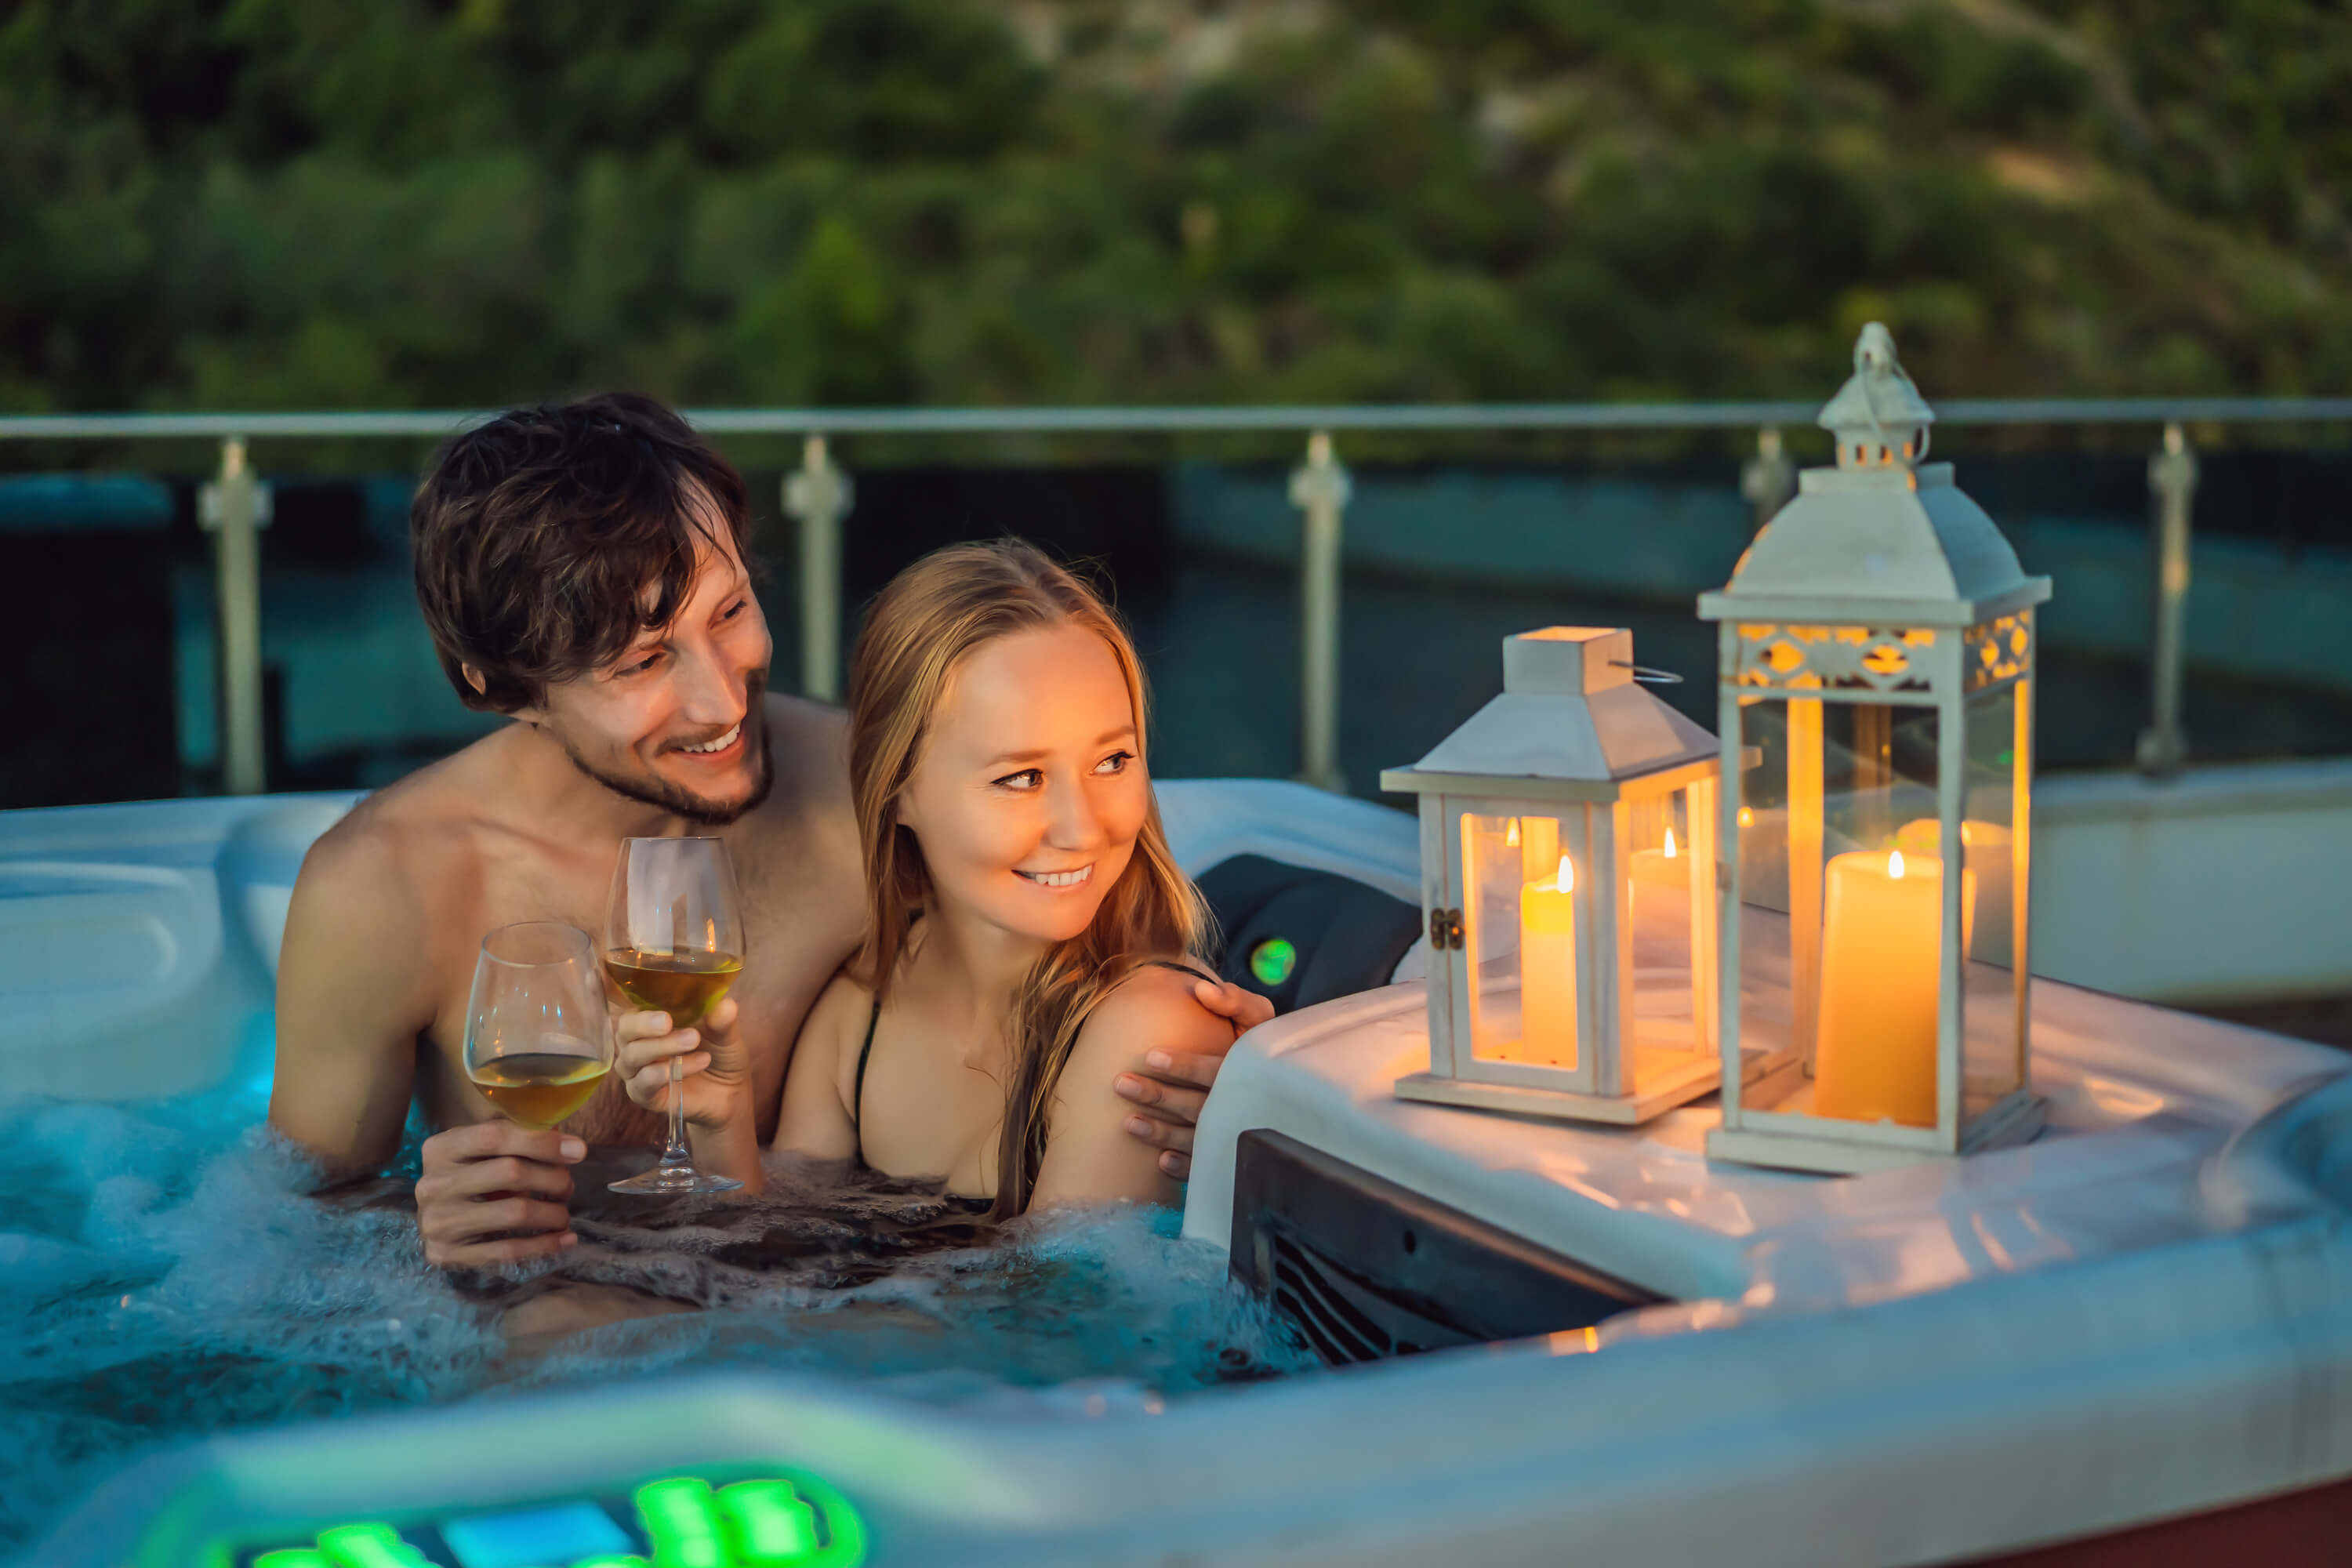 Hot Tubs You'll Love in 2023